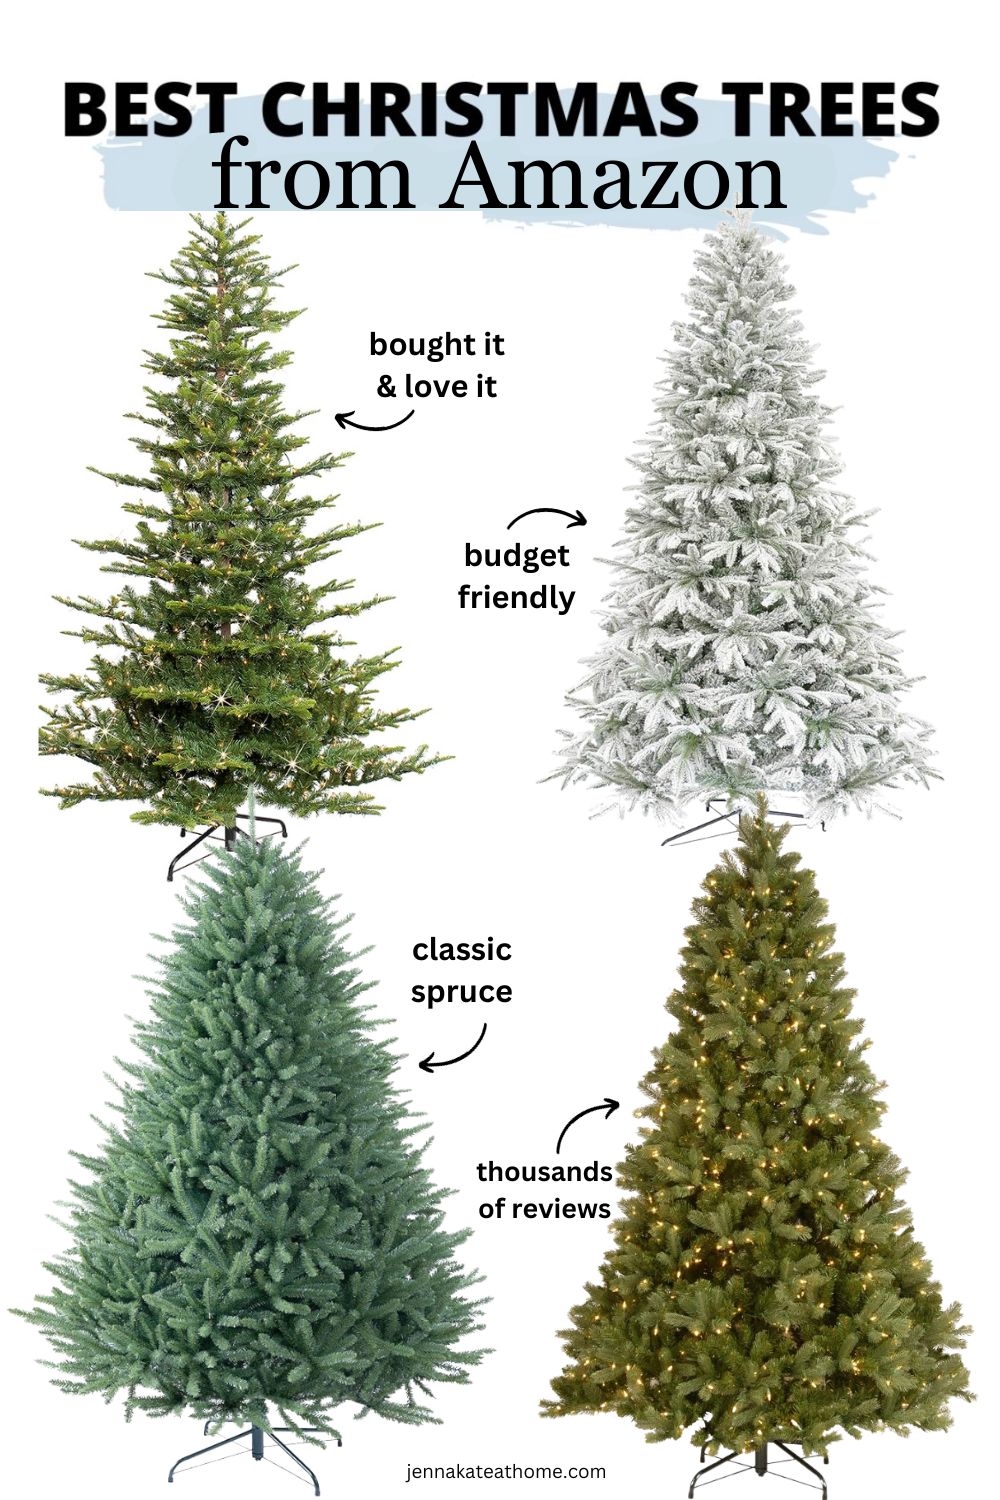 Collage of Amazon best artificial Christmas trees